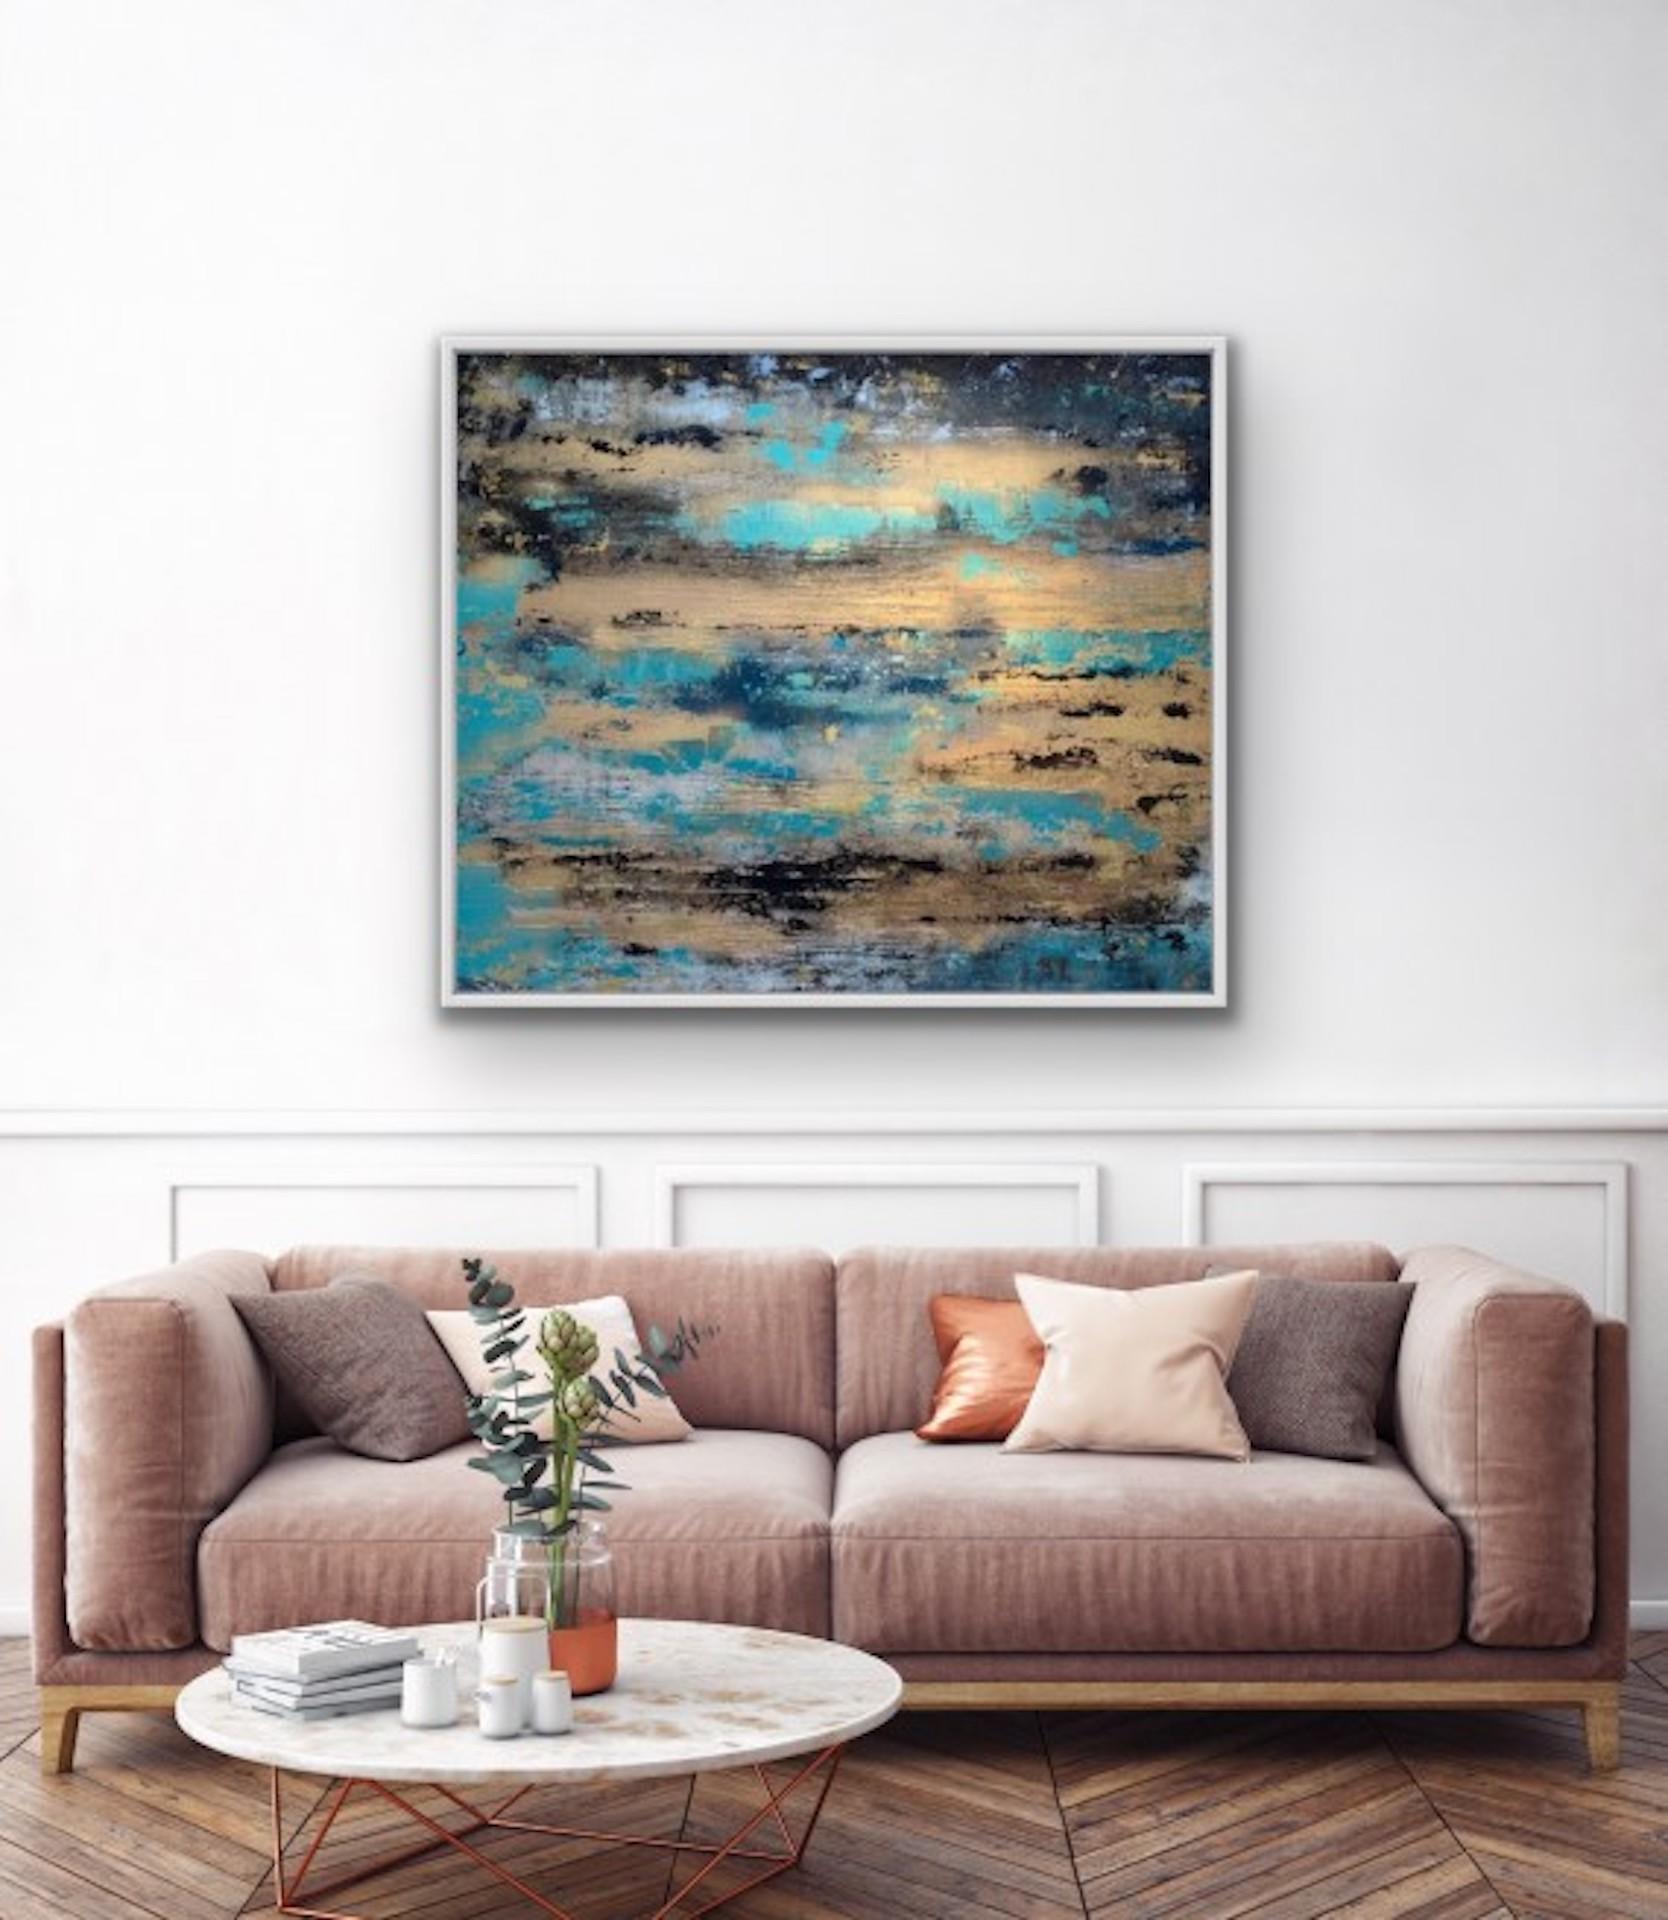 Living Room Decor Large Painting Rustic Decor Seascape Painting Scotland, Extra Large Sapphire Waters Acrylic Painting